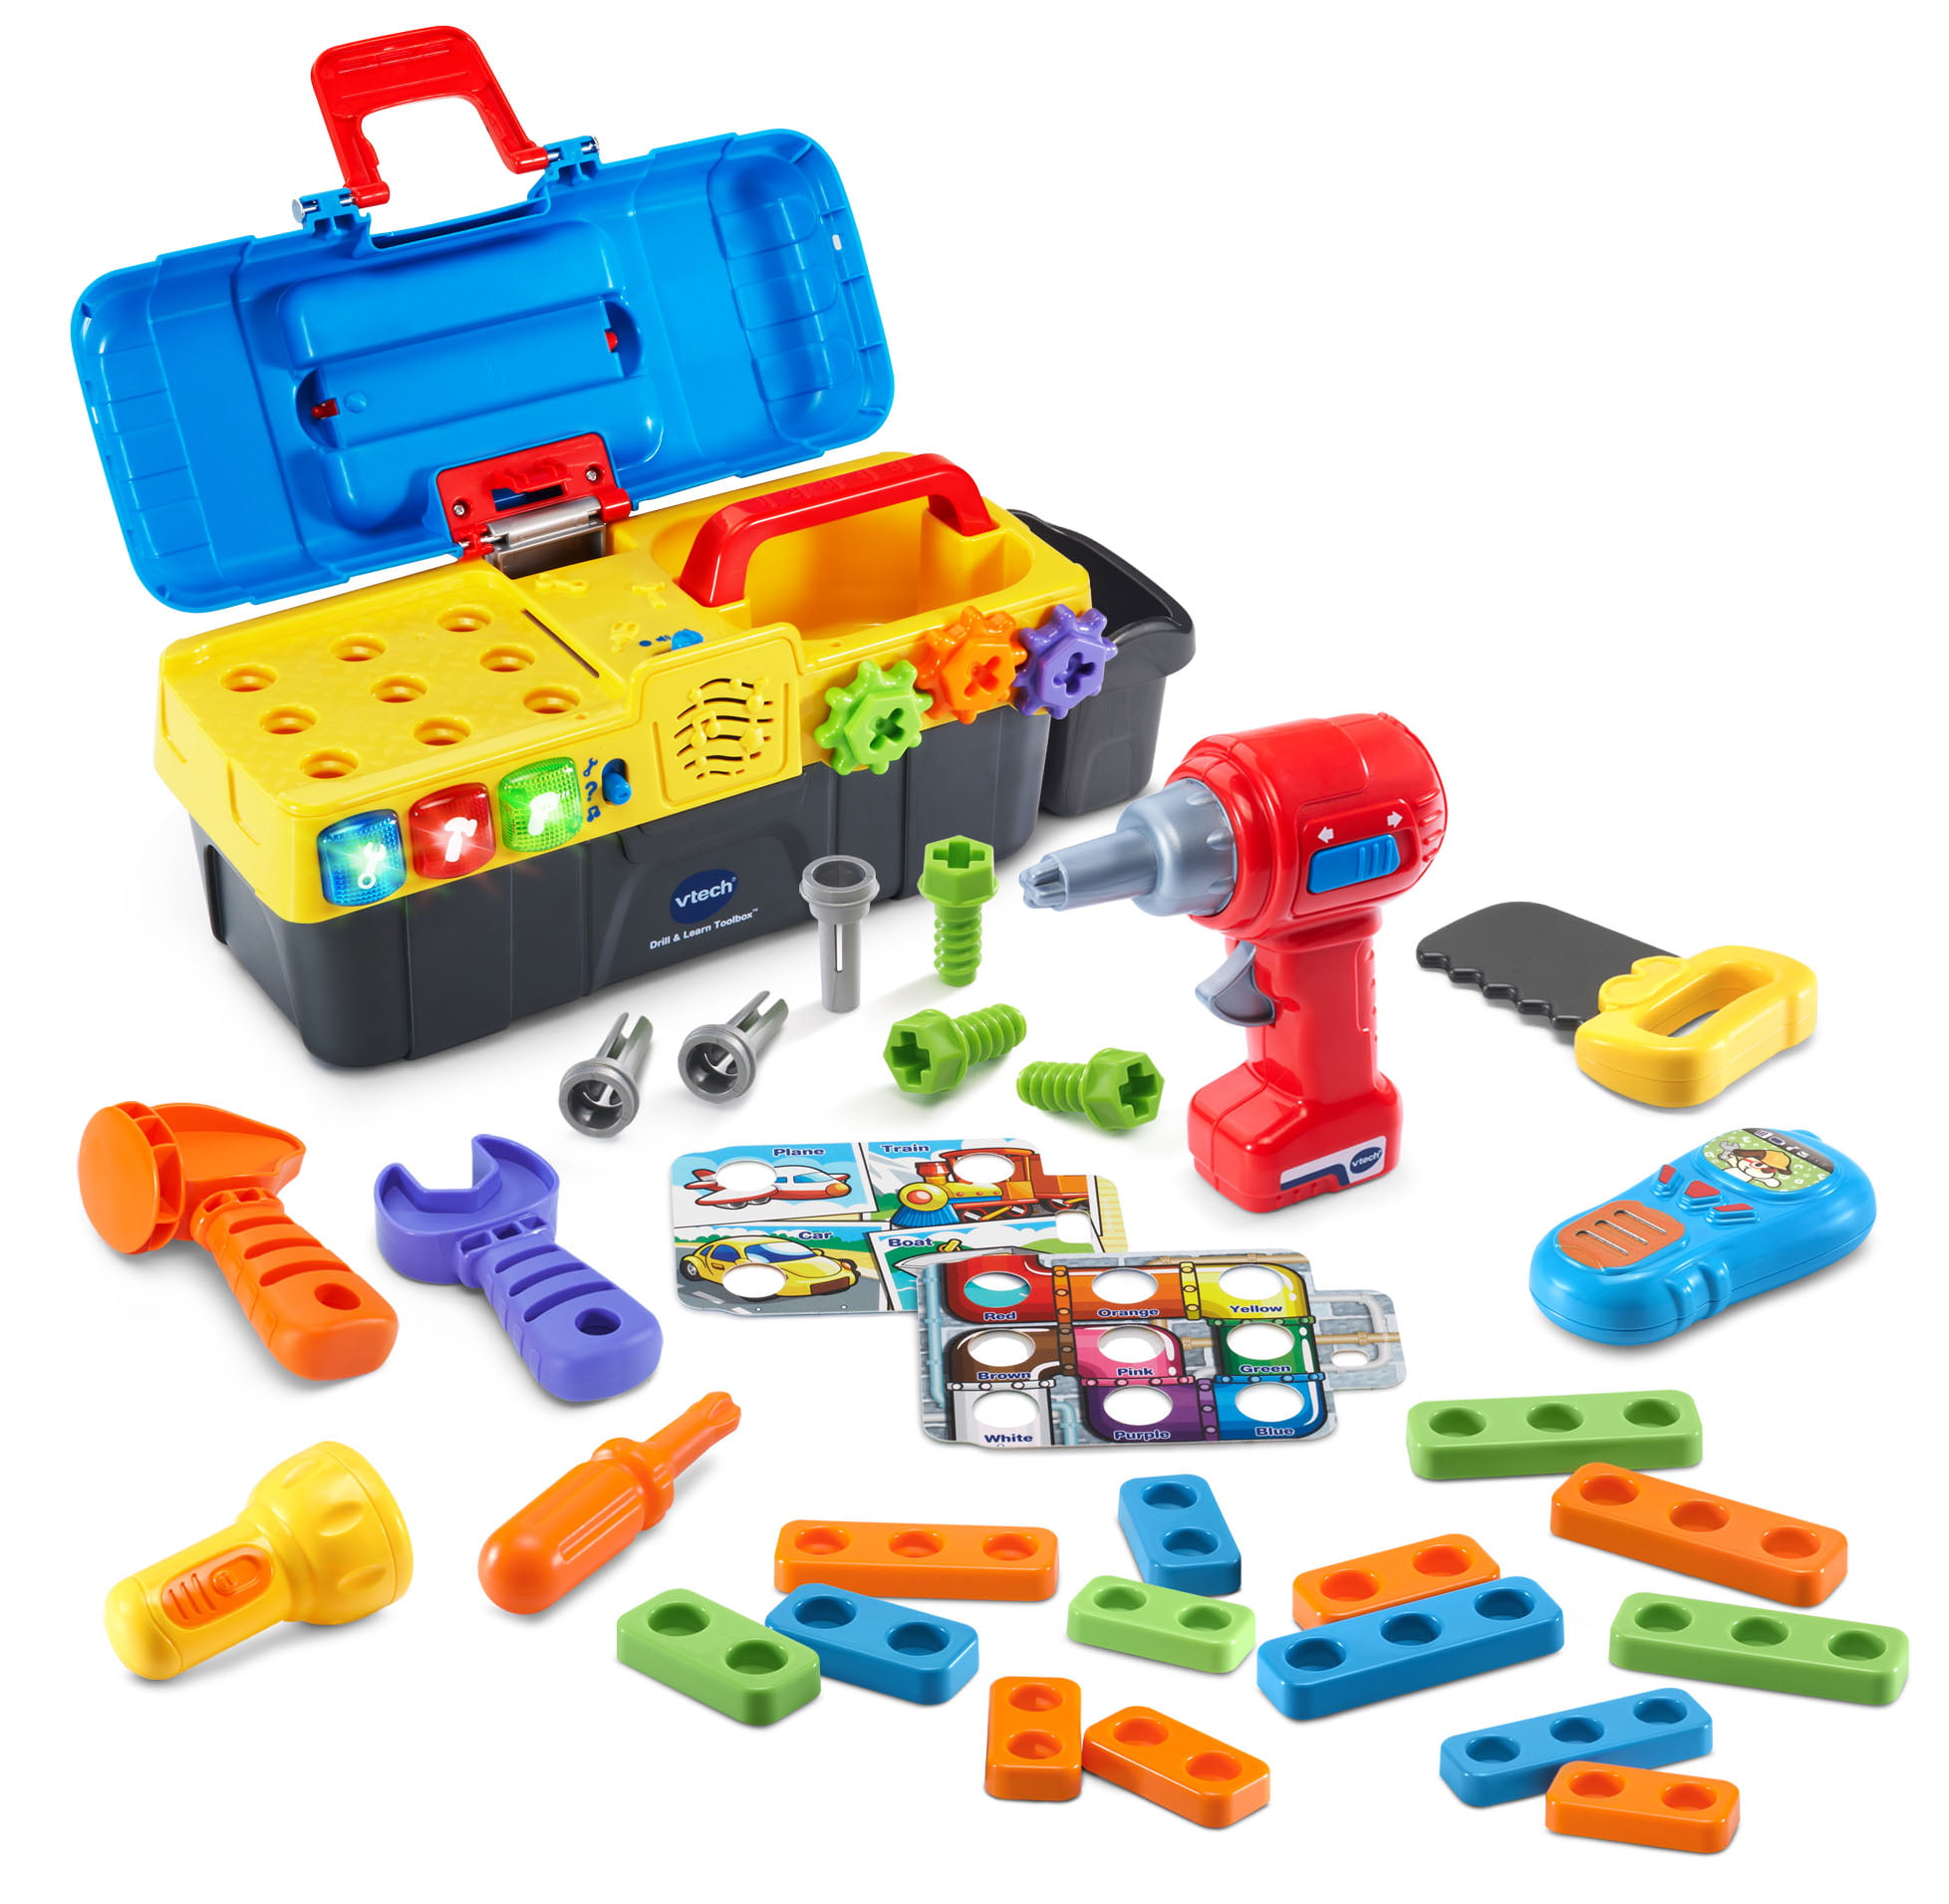 VTech Drill and Learn Toolbox Deluxe Role-Play Toolbox Toy